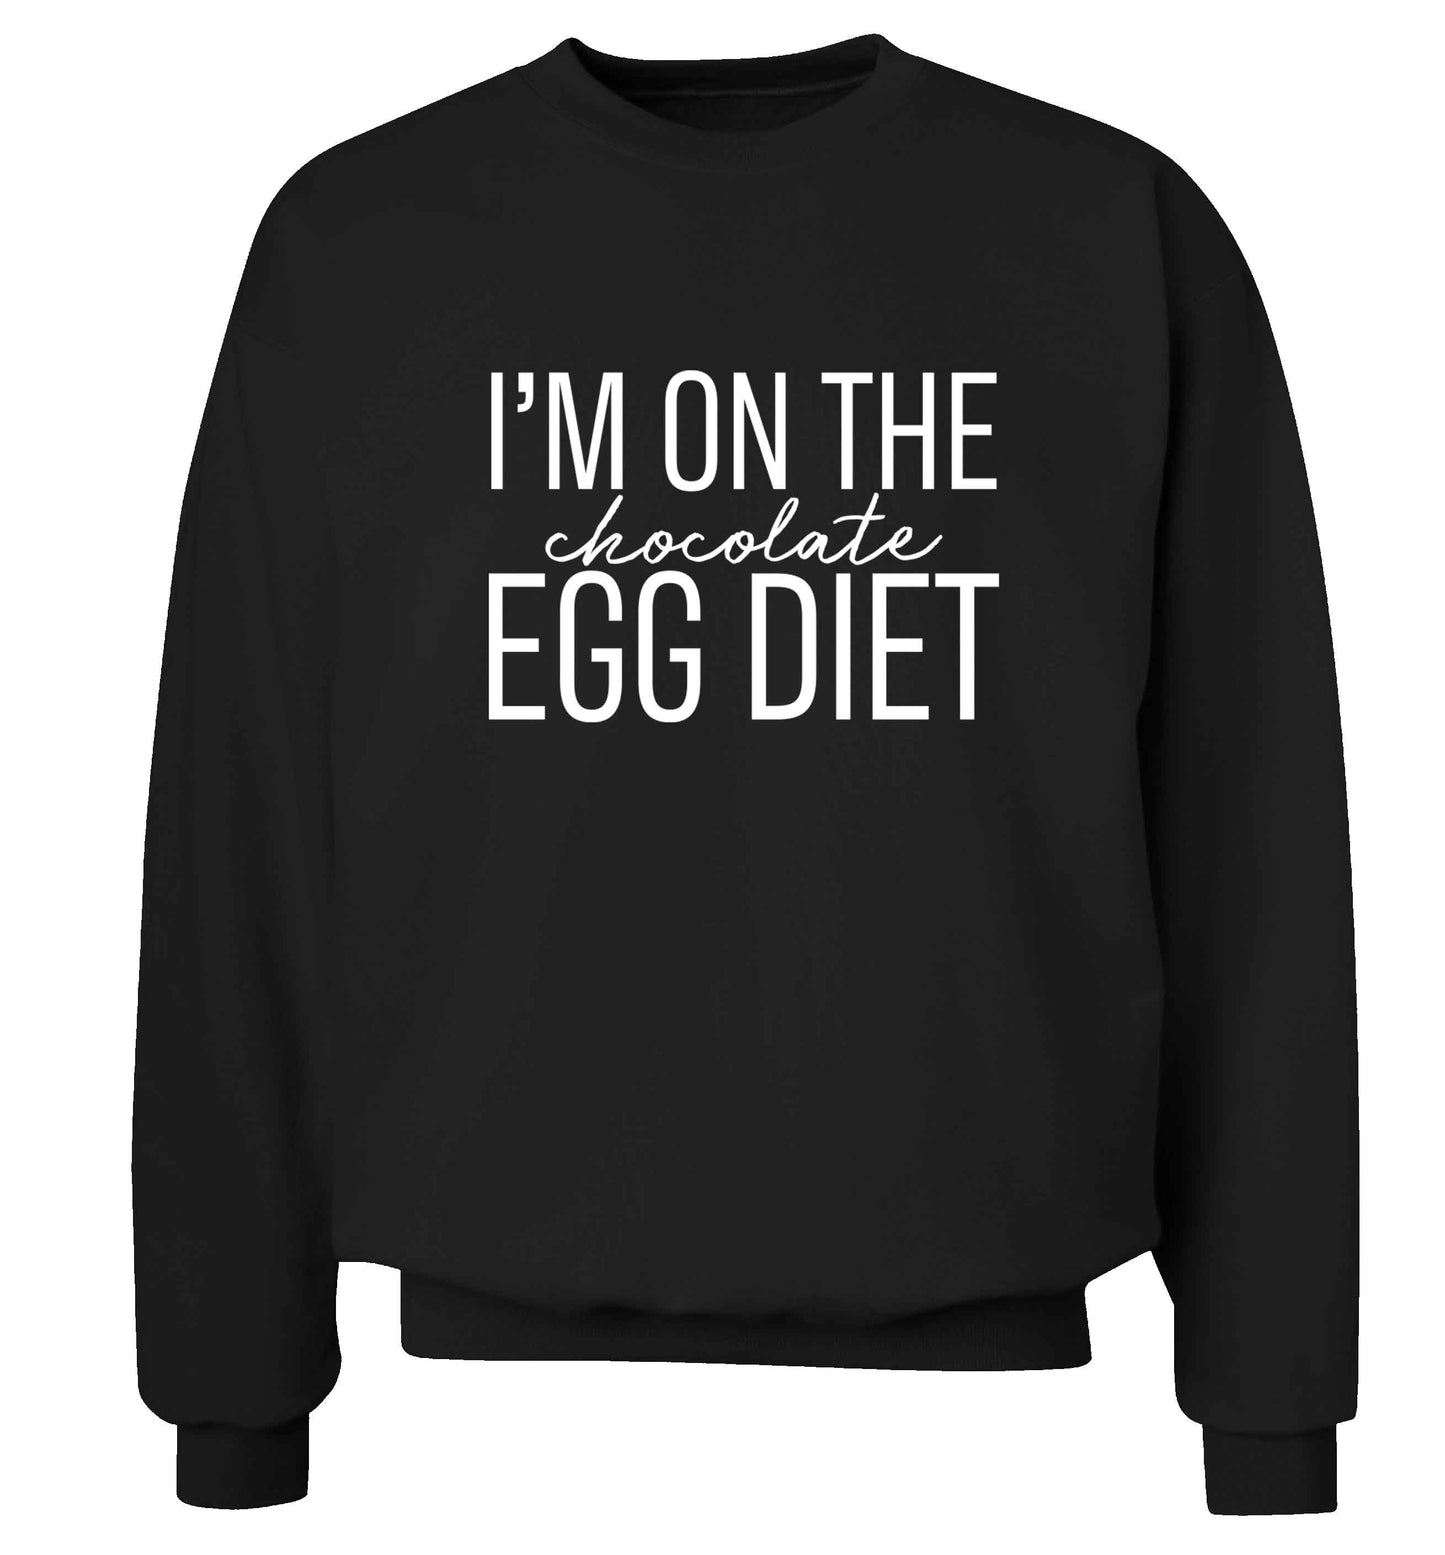 I'm on the chocolate egg diet adult's unisex black sweater 2XL